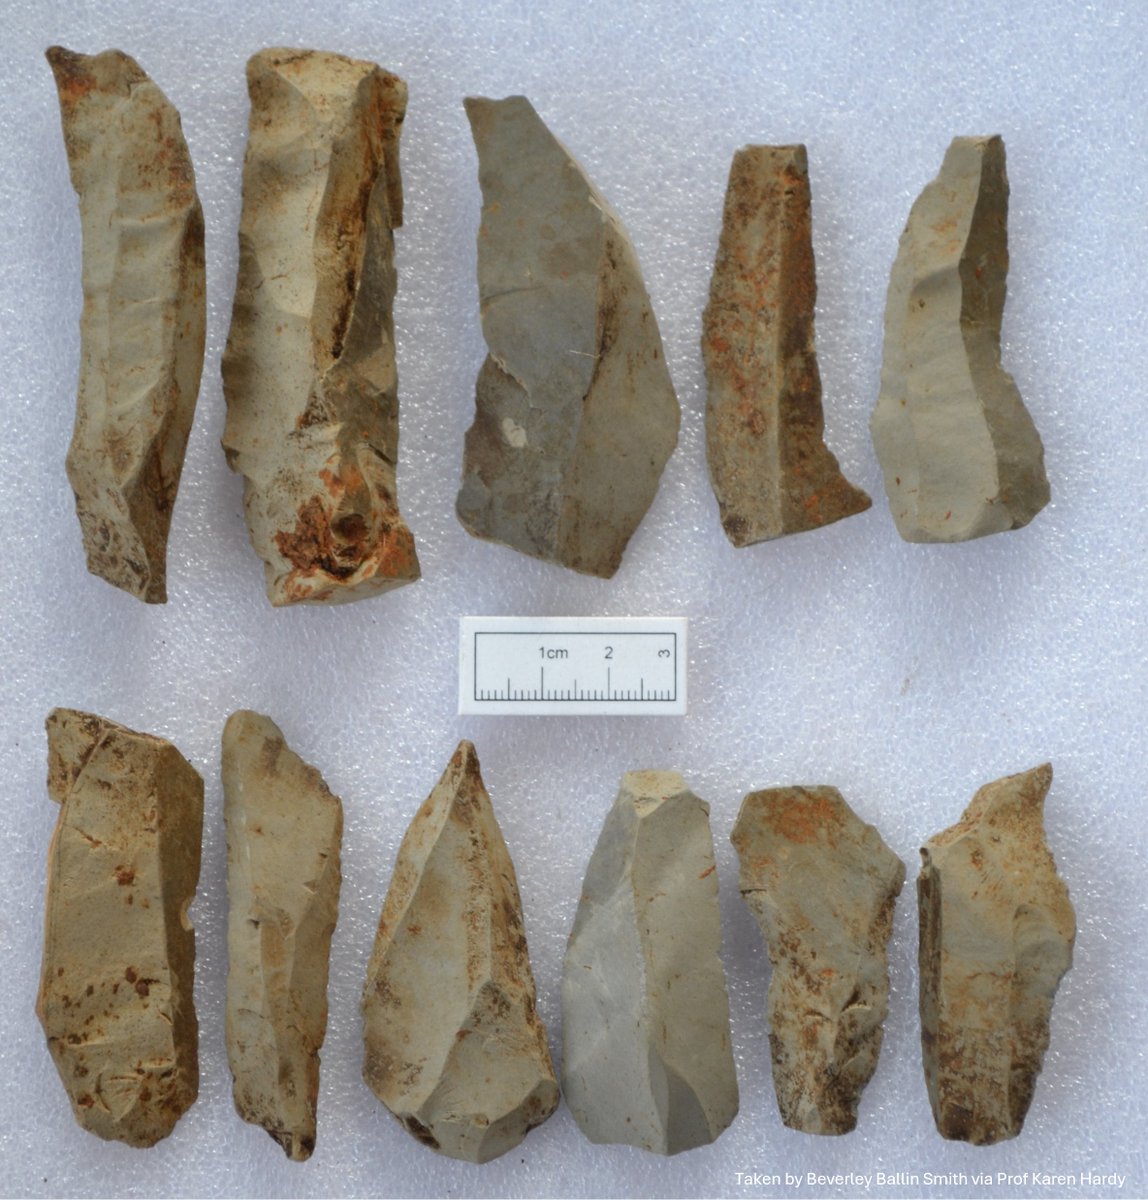 These tiny stone tools found in the Inner Hebrides were left behind by people who arrived in Scotland around 12,000 years ago. On 25 May, discover what happened when experts discovered a new Ahrensburgian site on An t-Eilean Sgitheanach (Skye): bit.ly/Arp24 #ARP2024